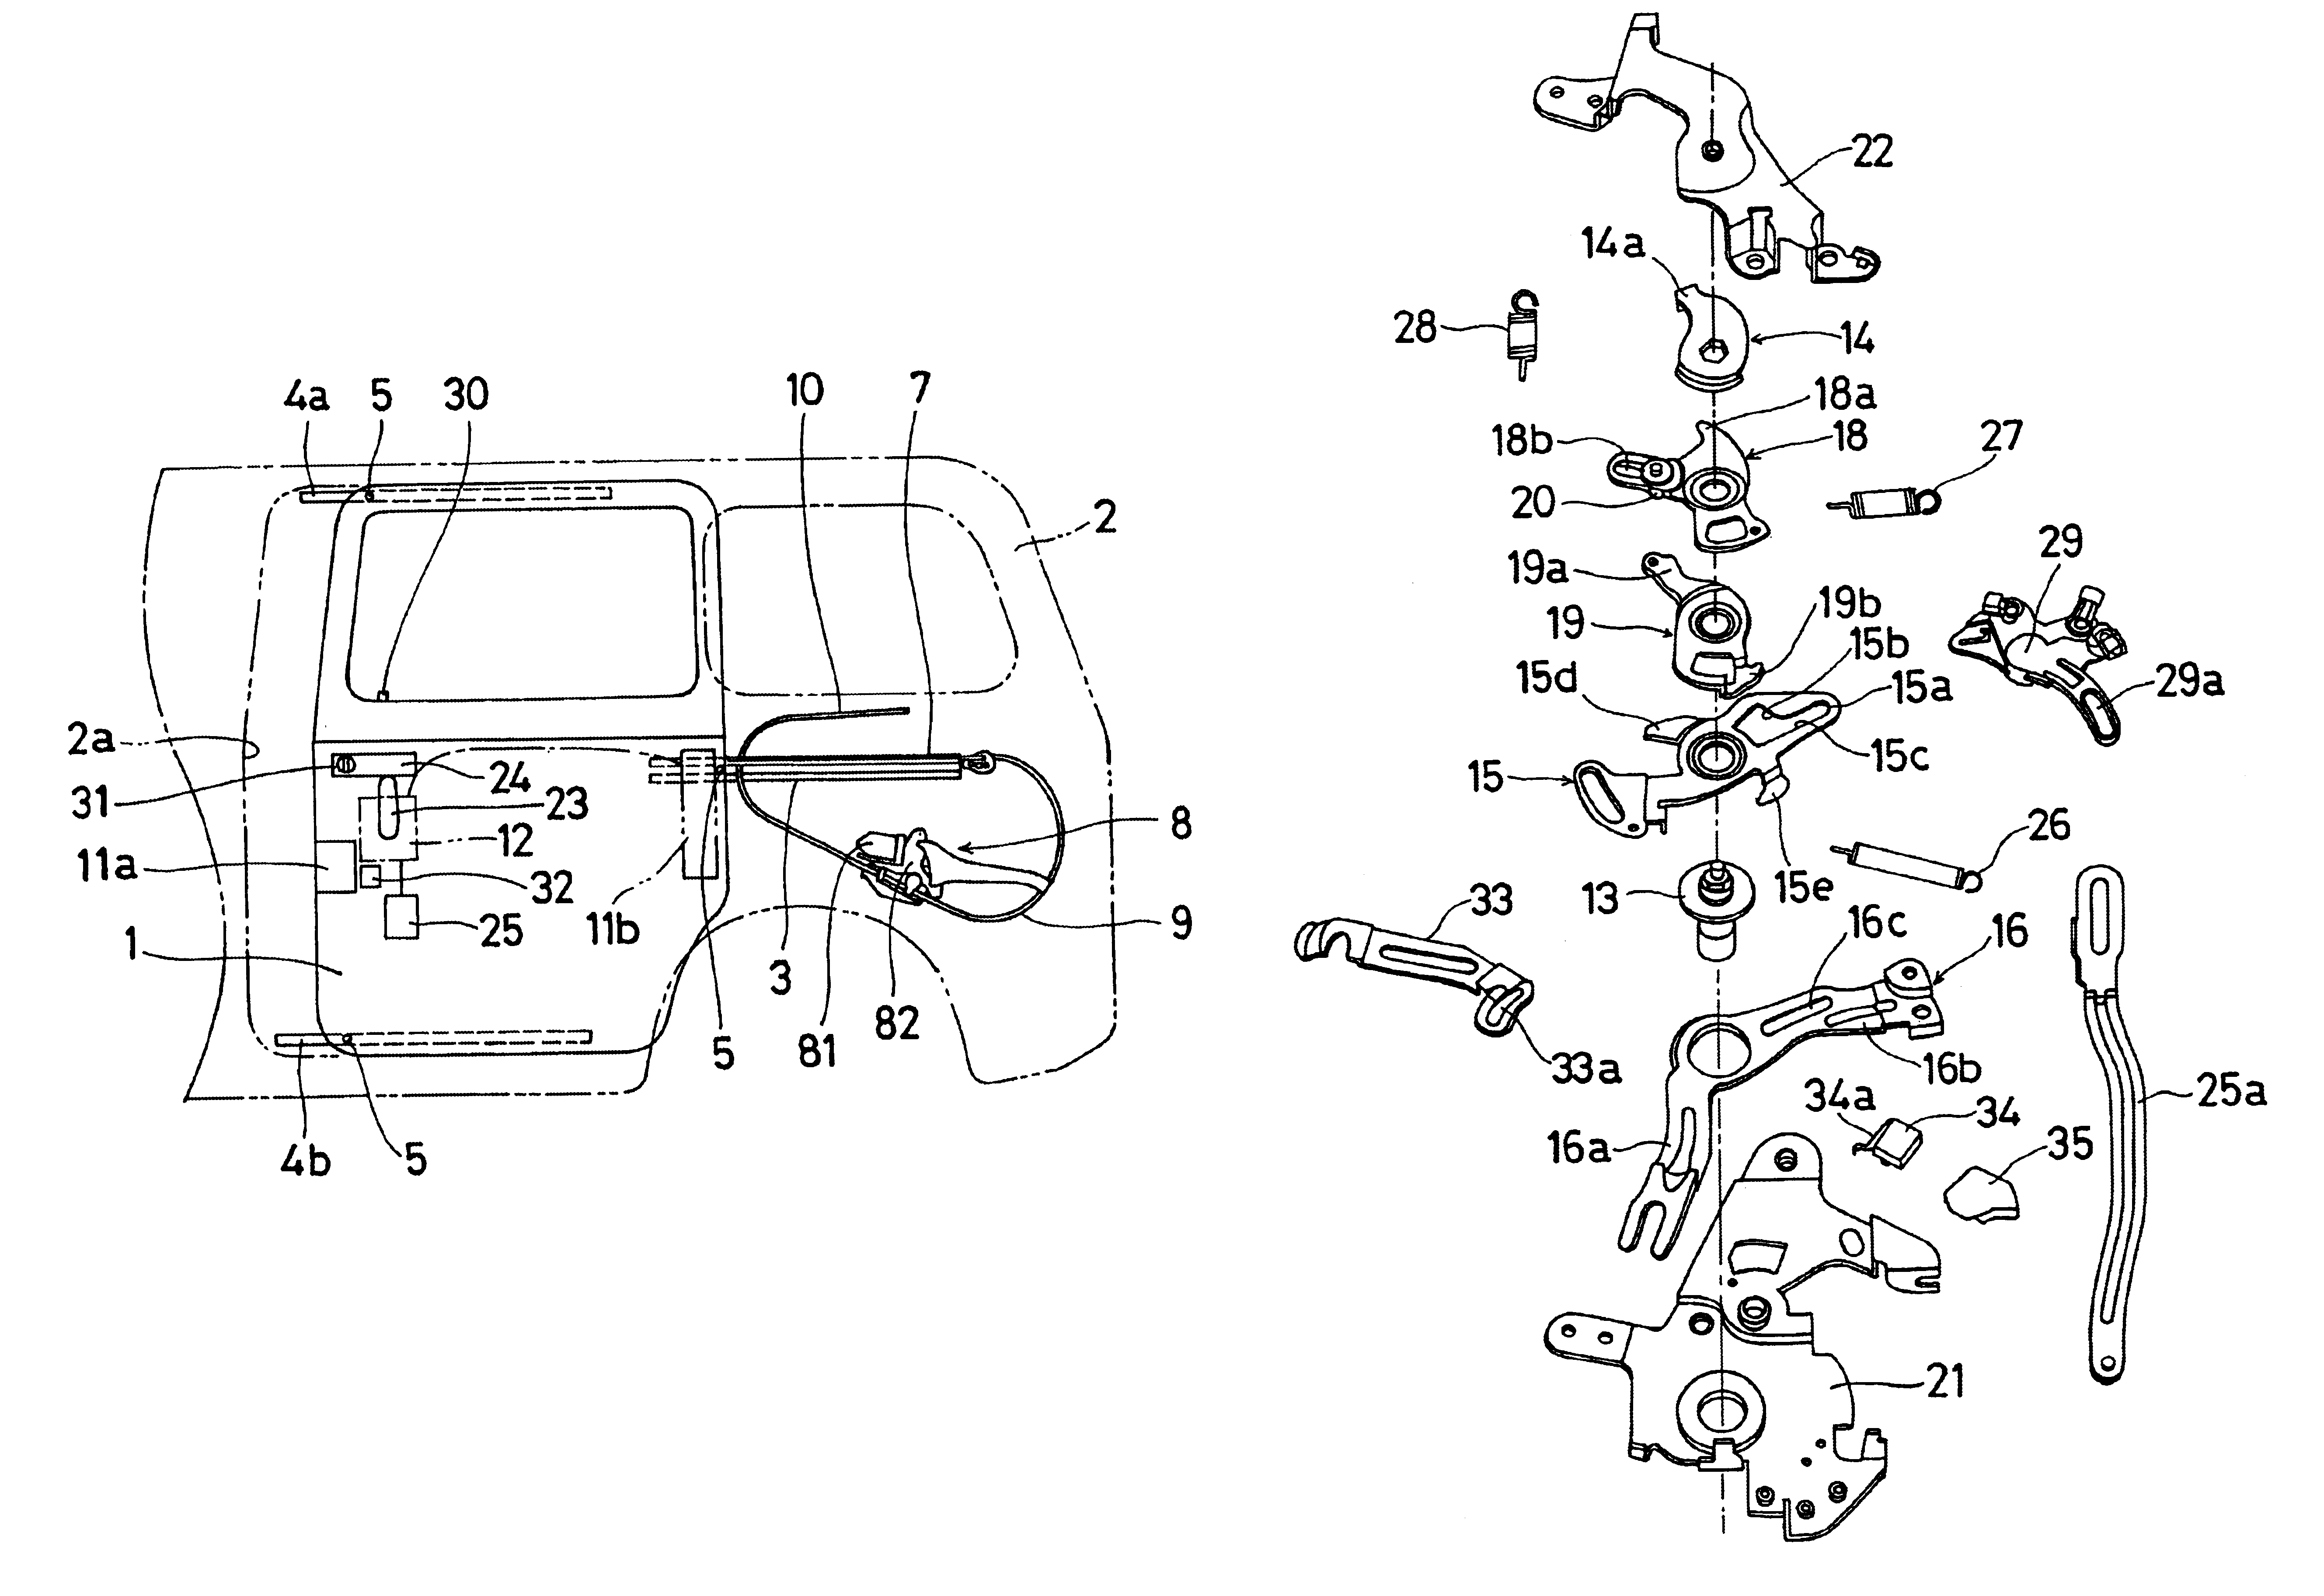 Child safety slide door apparatus for vehicles